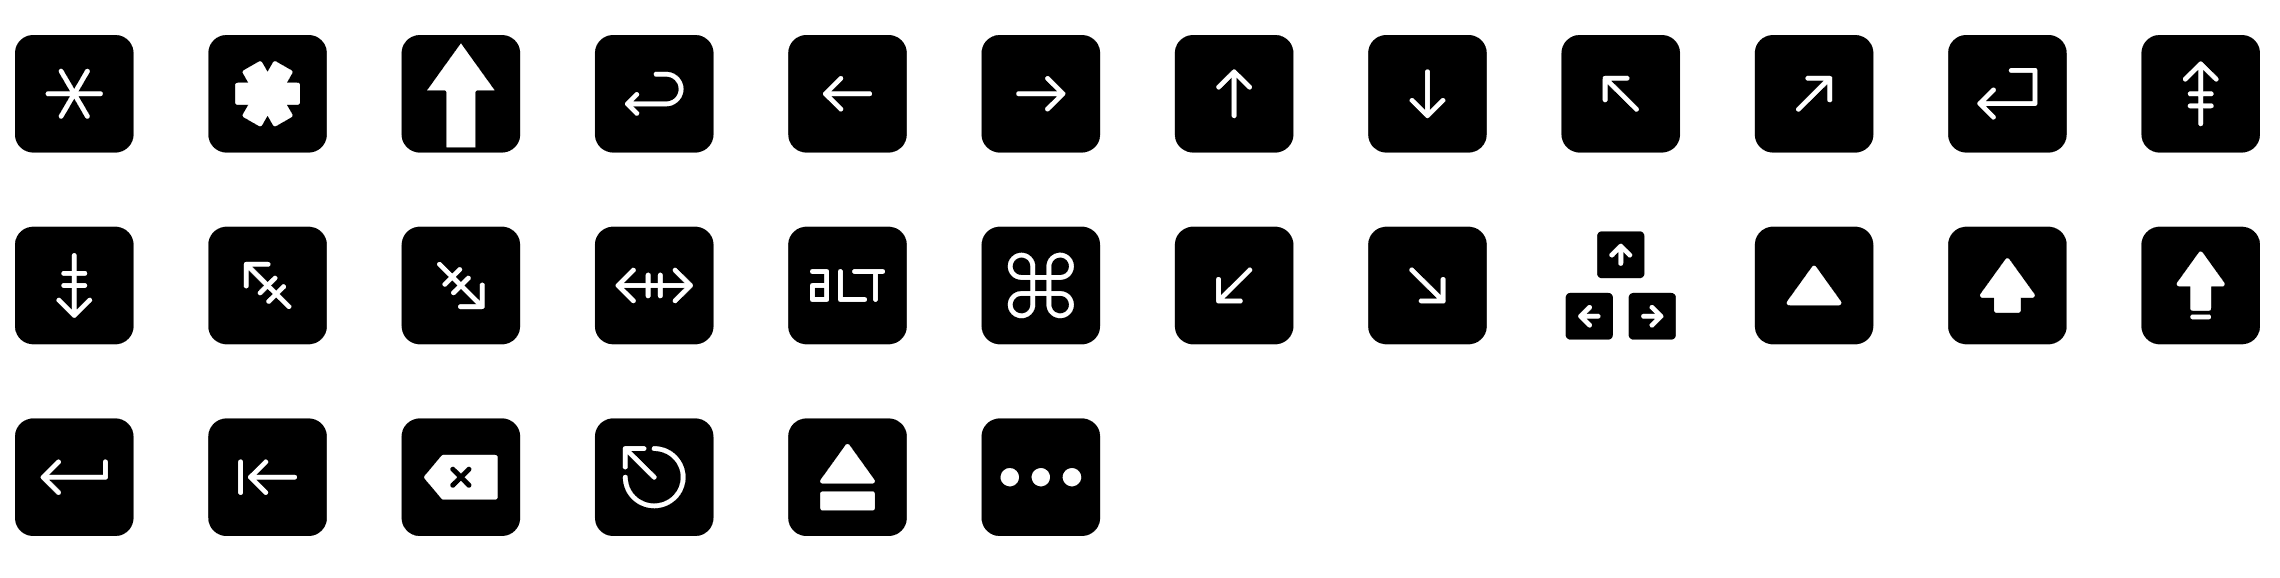 keyboard-glyph-icons-preview